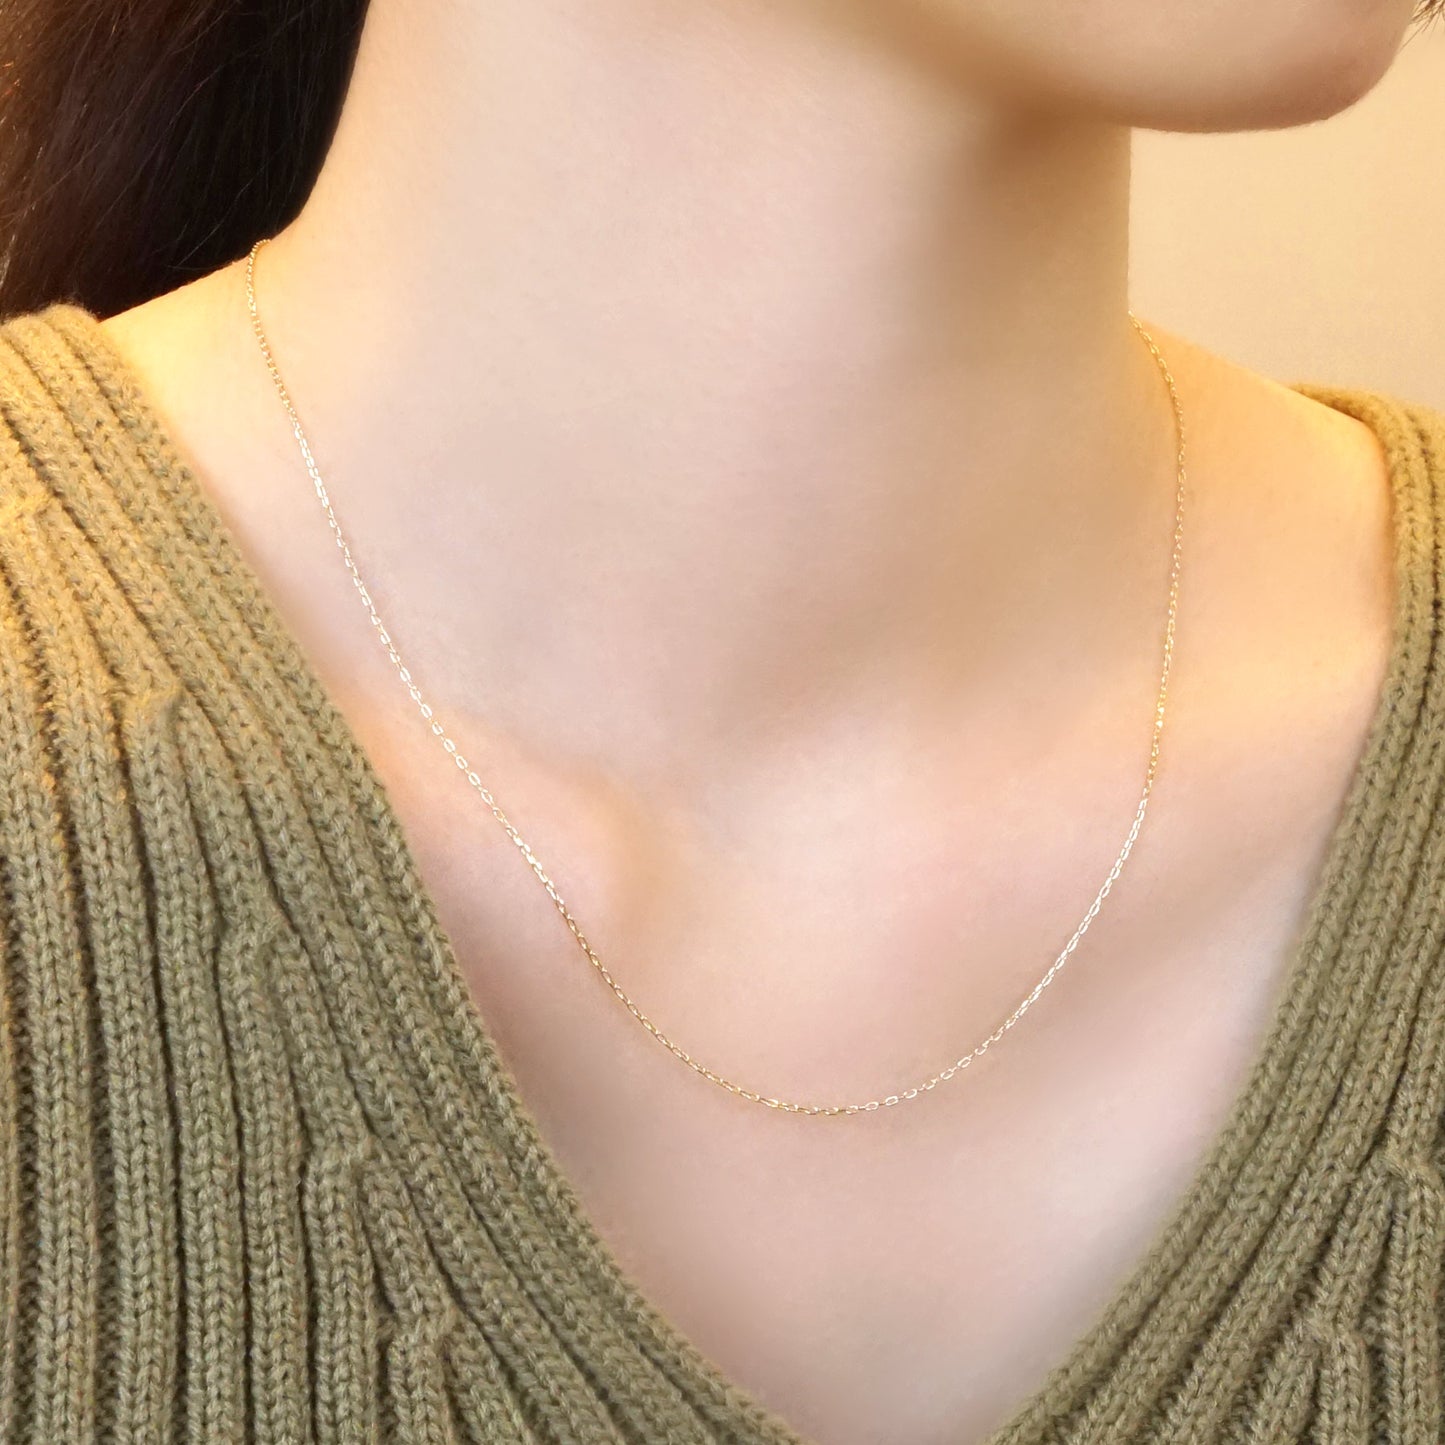 [Palette] 10K Yellow Gold Slide Pin Chain Necklace - Model Image